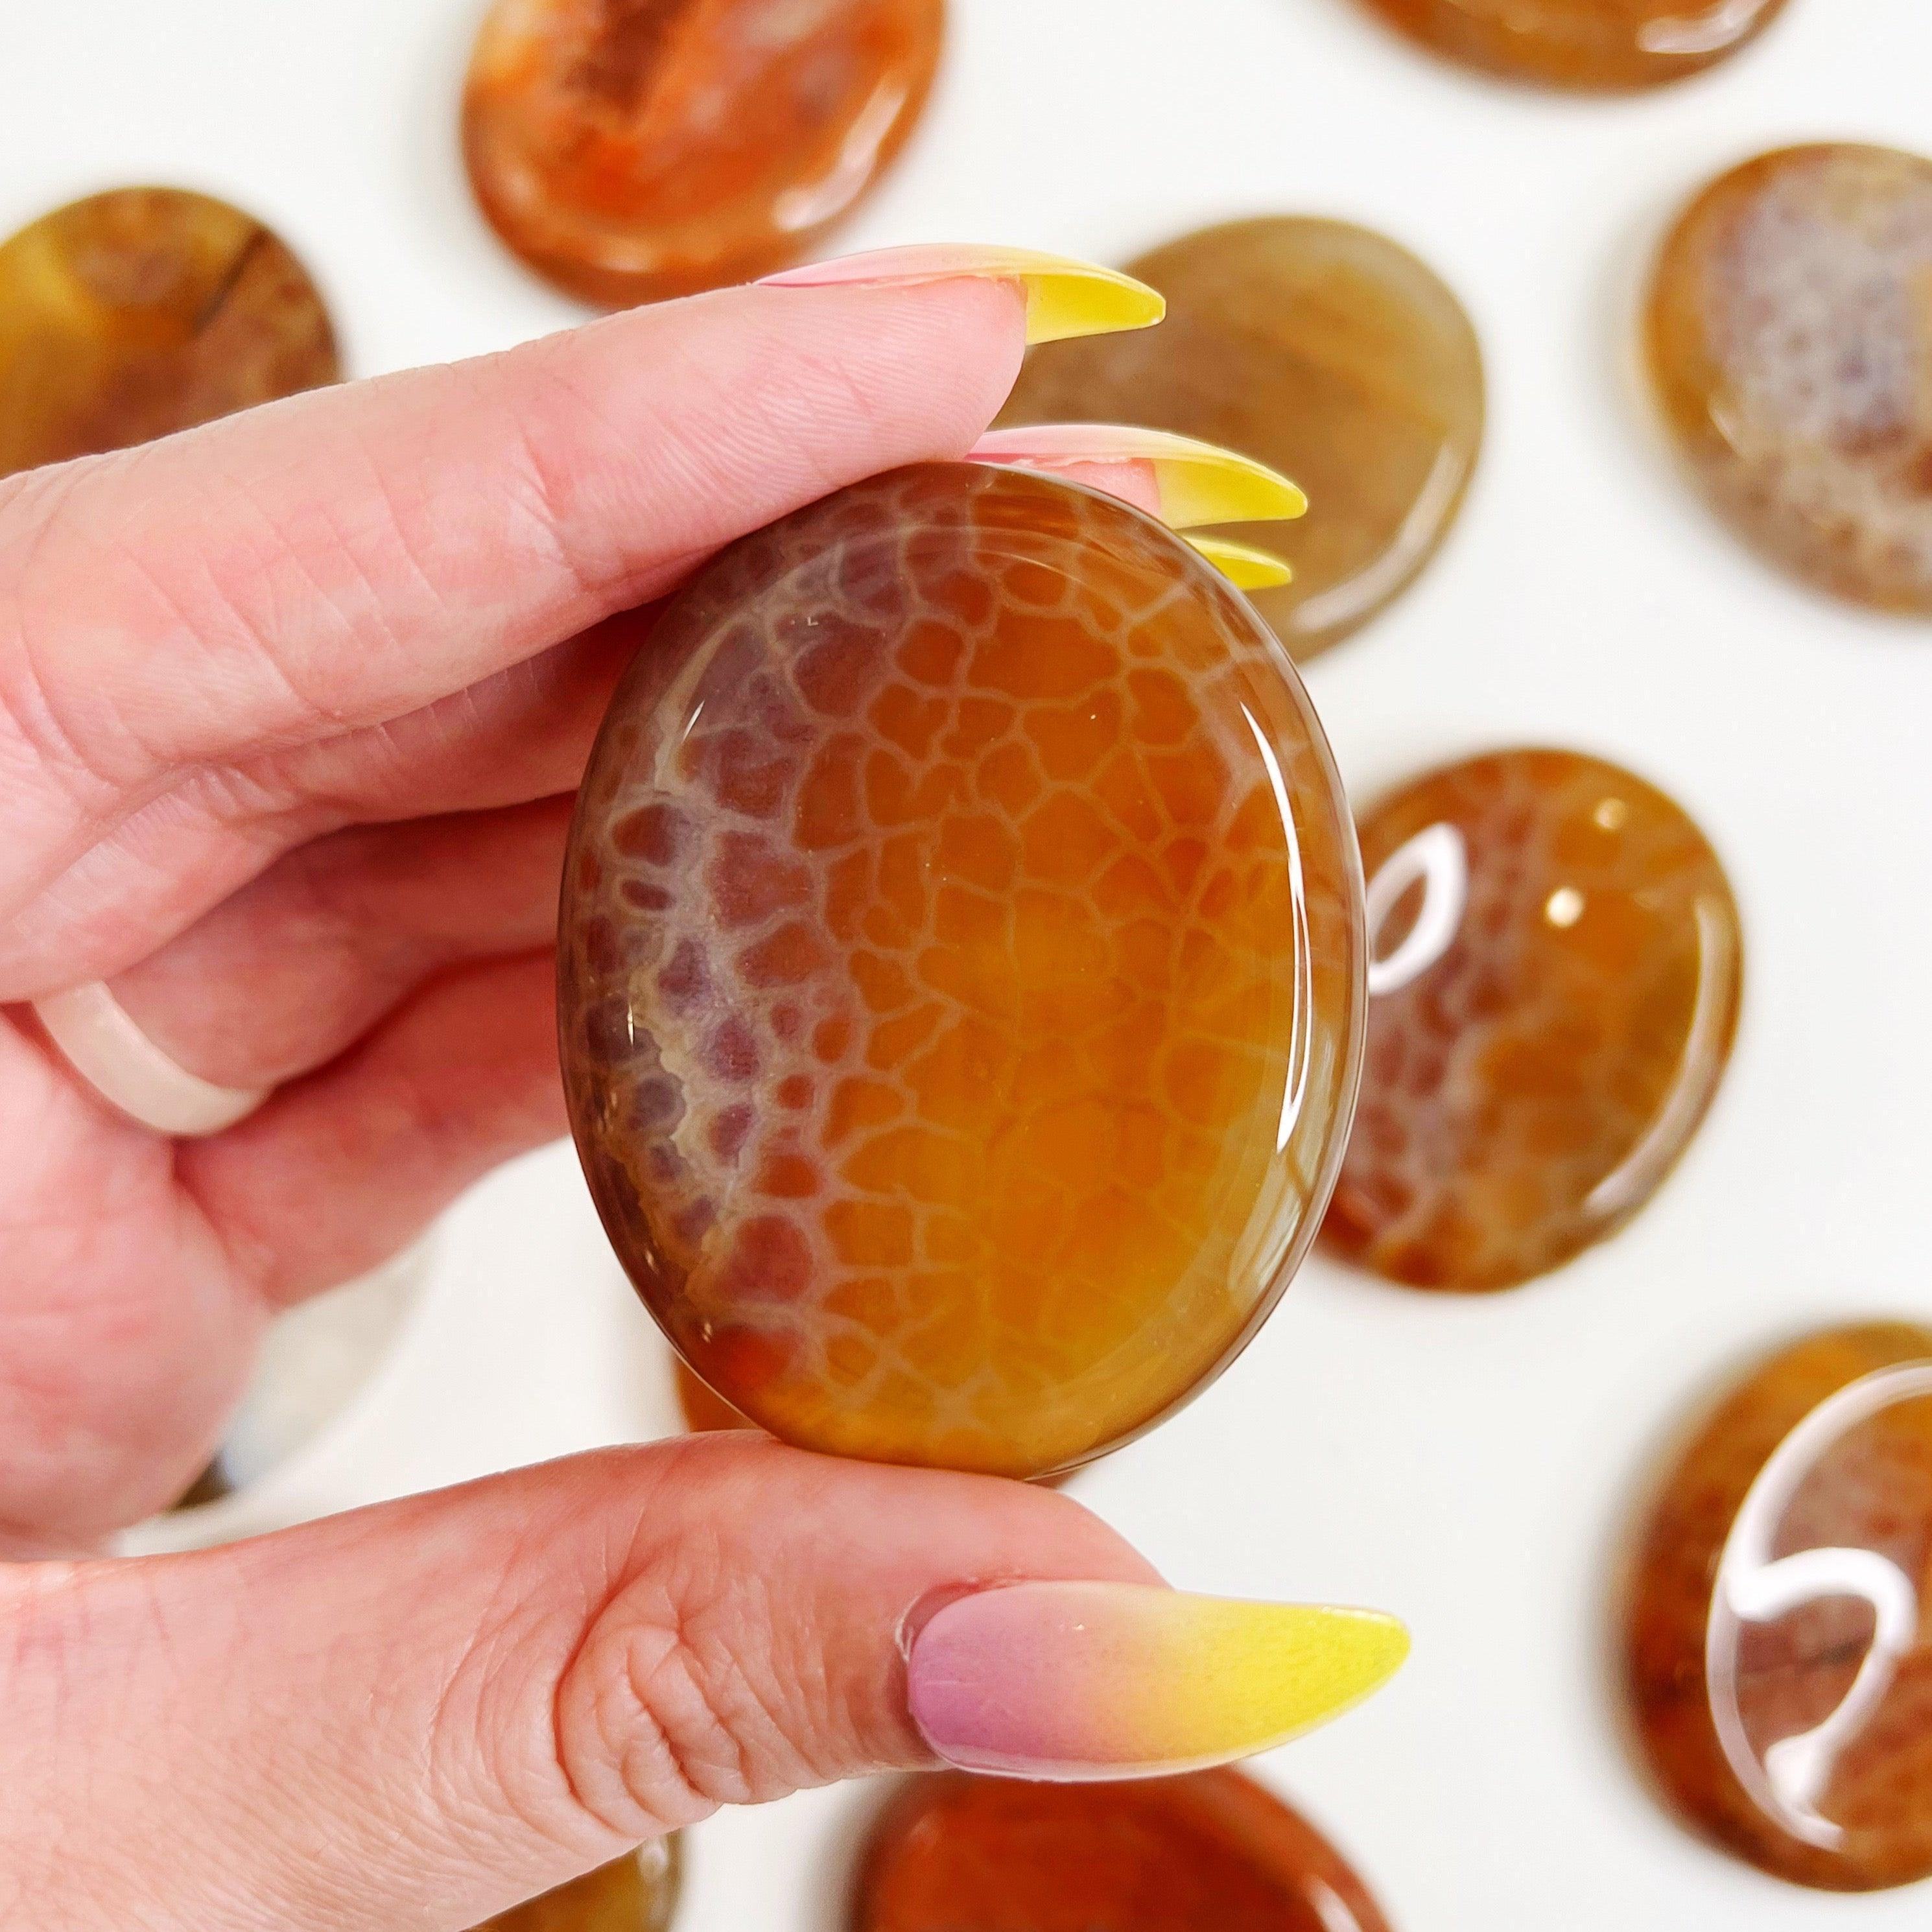 FIRE AGATE THUMBSTONE - 33 bday, 444 sale, Agate, emotional support, end of year sale, fire agate, holiday sale, new year sale, pocket crystal, pocket stone, thumbstone, update, worry stone - The Mineral Maven